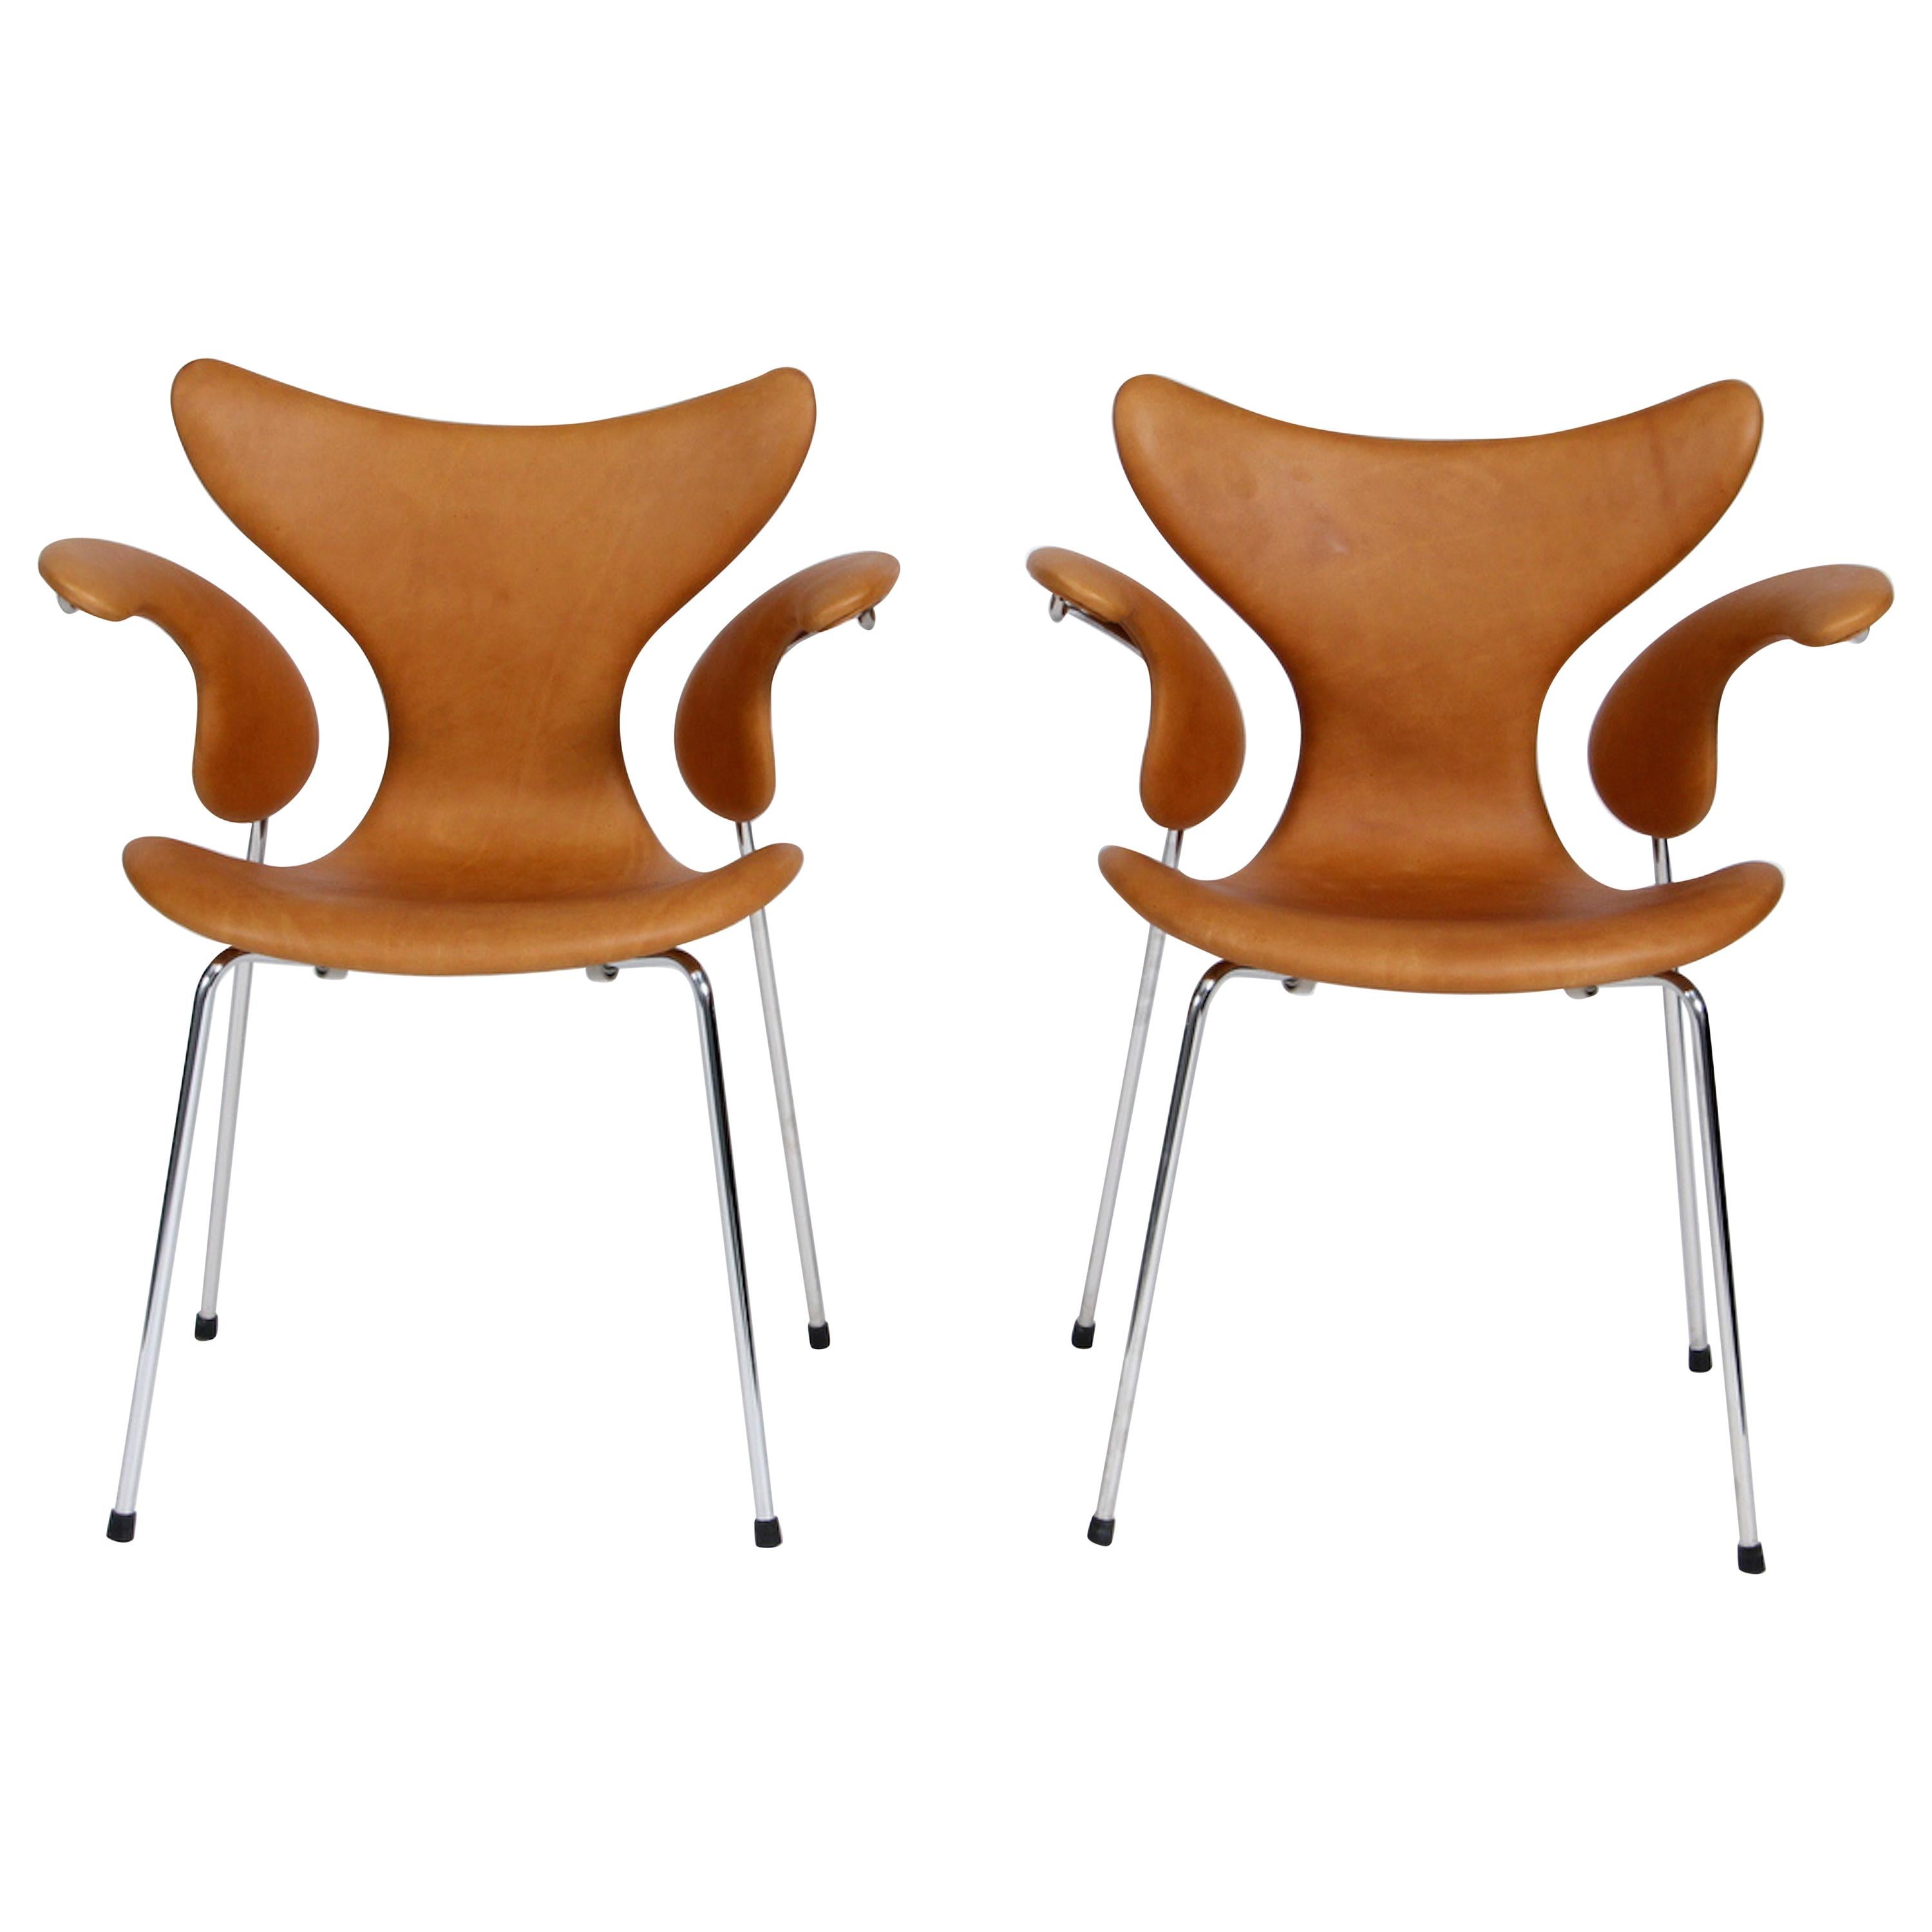 One Arne Jacobsen Brown Leather Seagull Chair